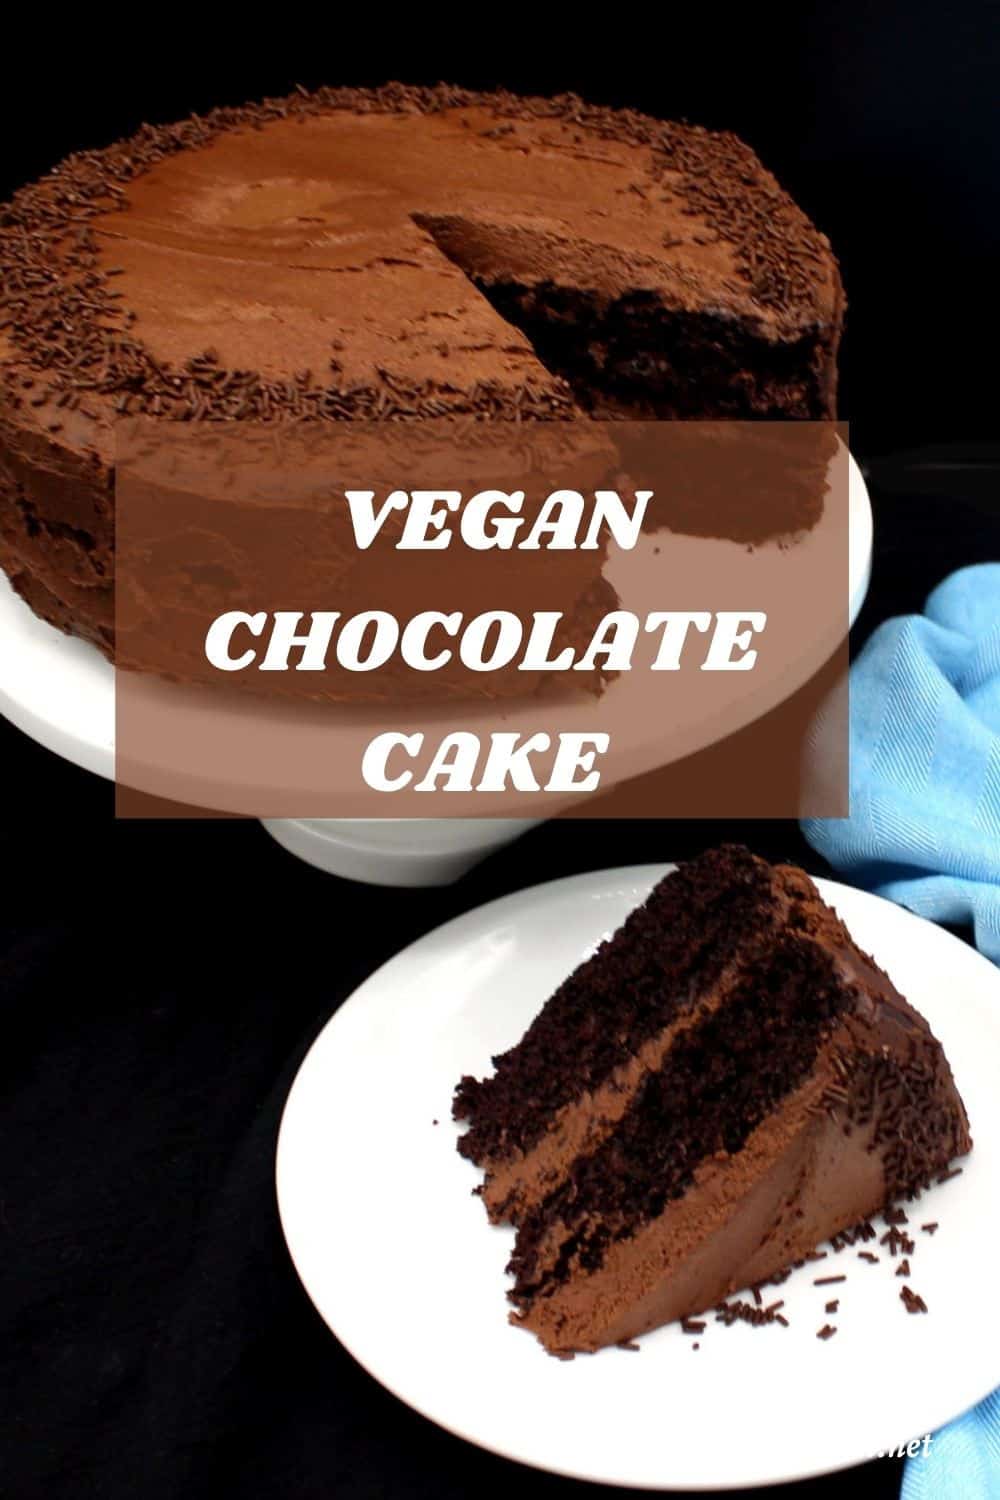 Image of a slice of cake with whole cake in background with text inlay "vegan chocolate cake"